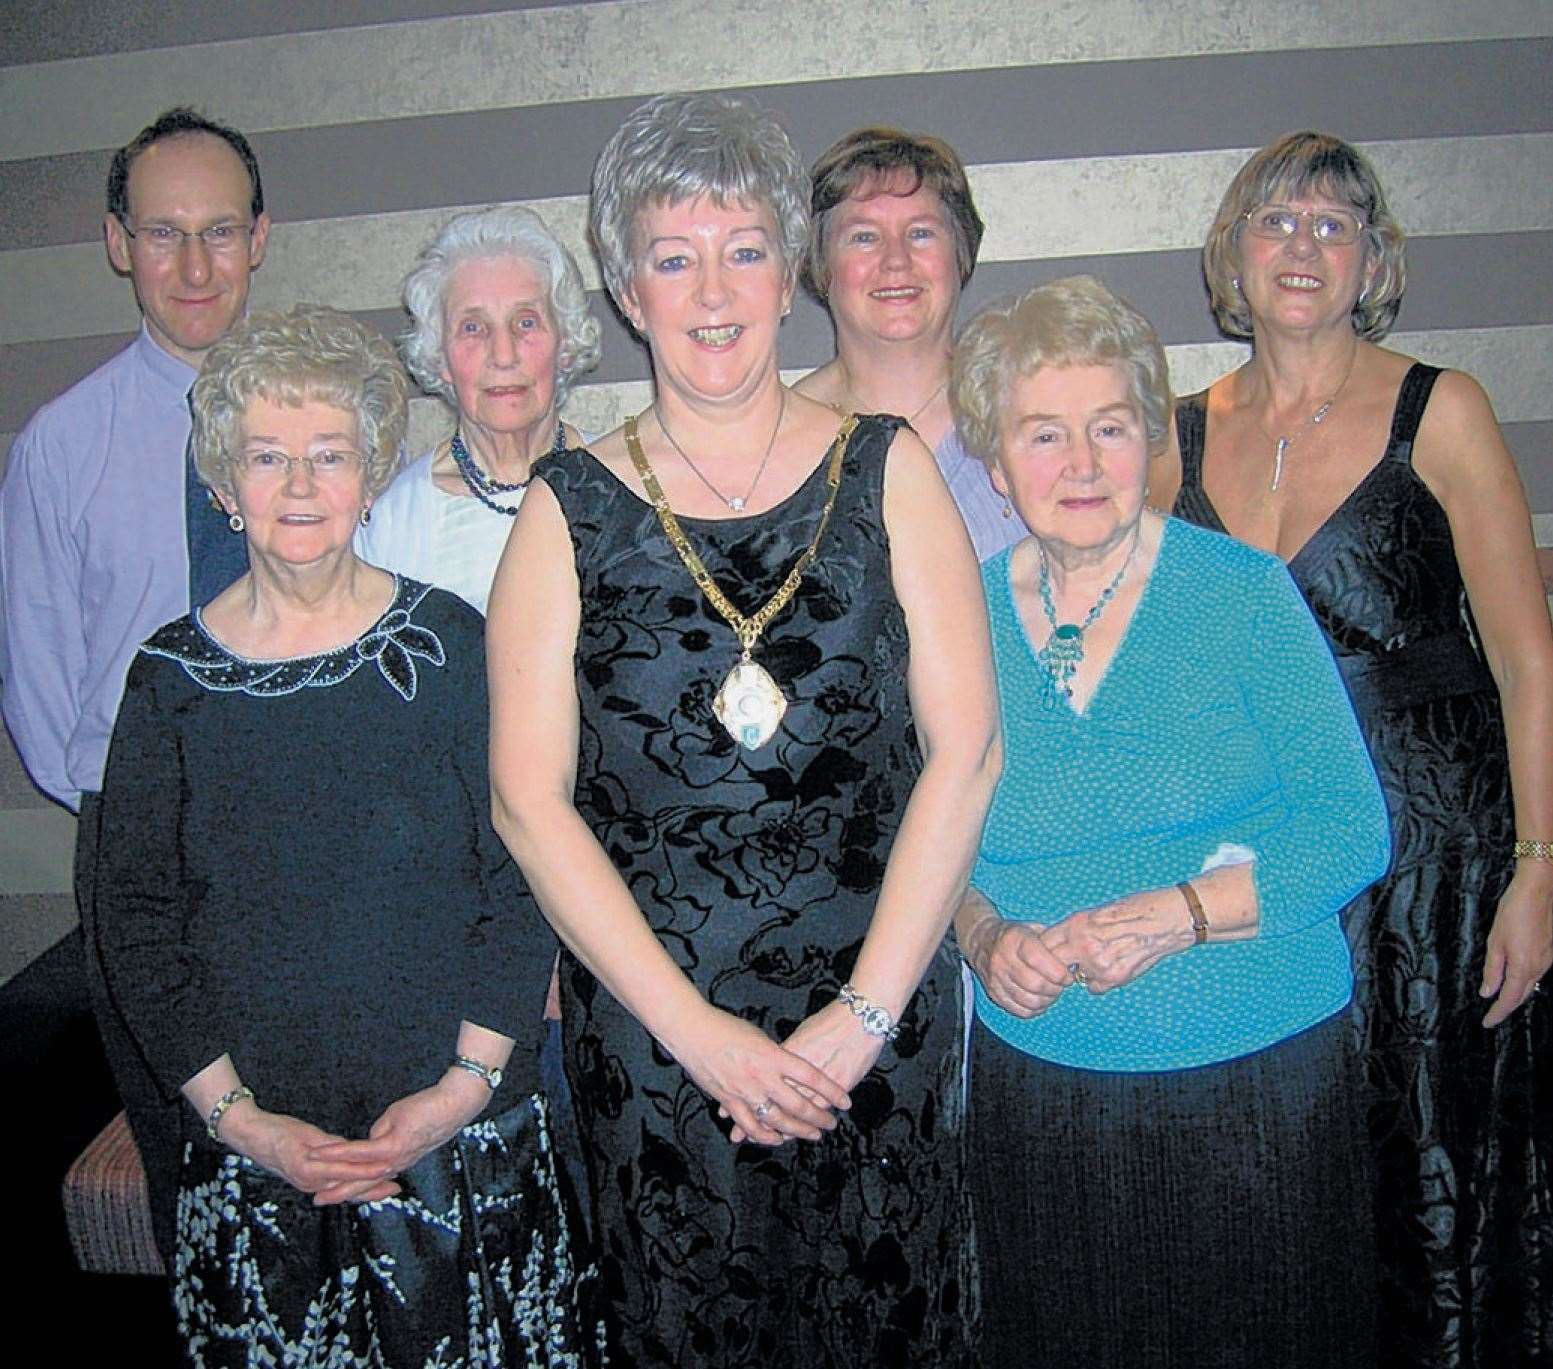 The president of the Edinburgh Caithness Association, Linda Stuart (centre), with members of the group’s committee in 2009. They are (from left) David Bolland, Katriona Gowans, Ina Rankin, Cath Tod, Nancy Dyer and Hilary Mackay.